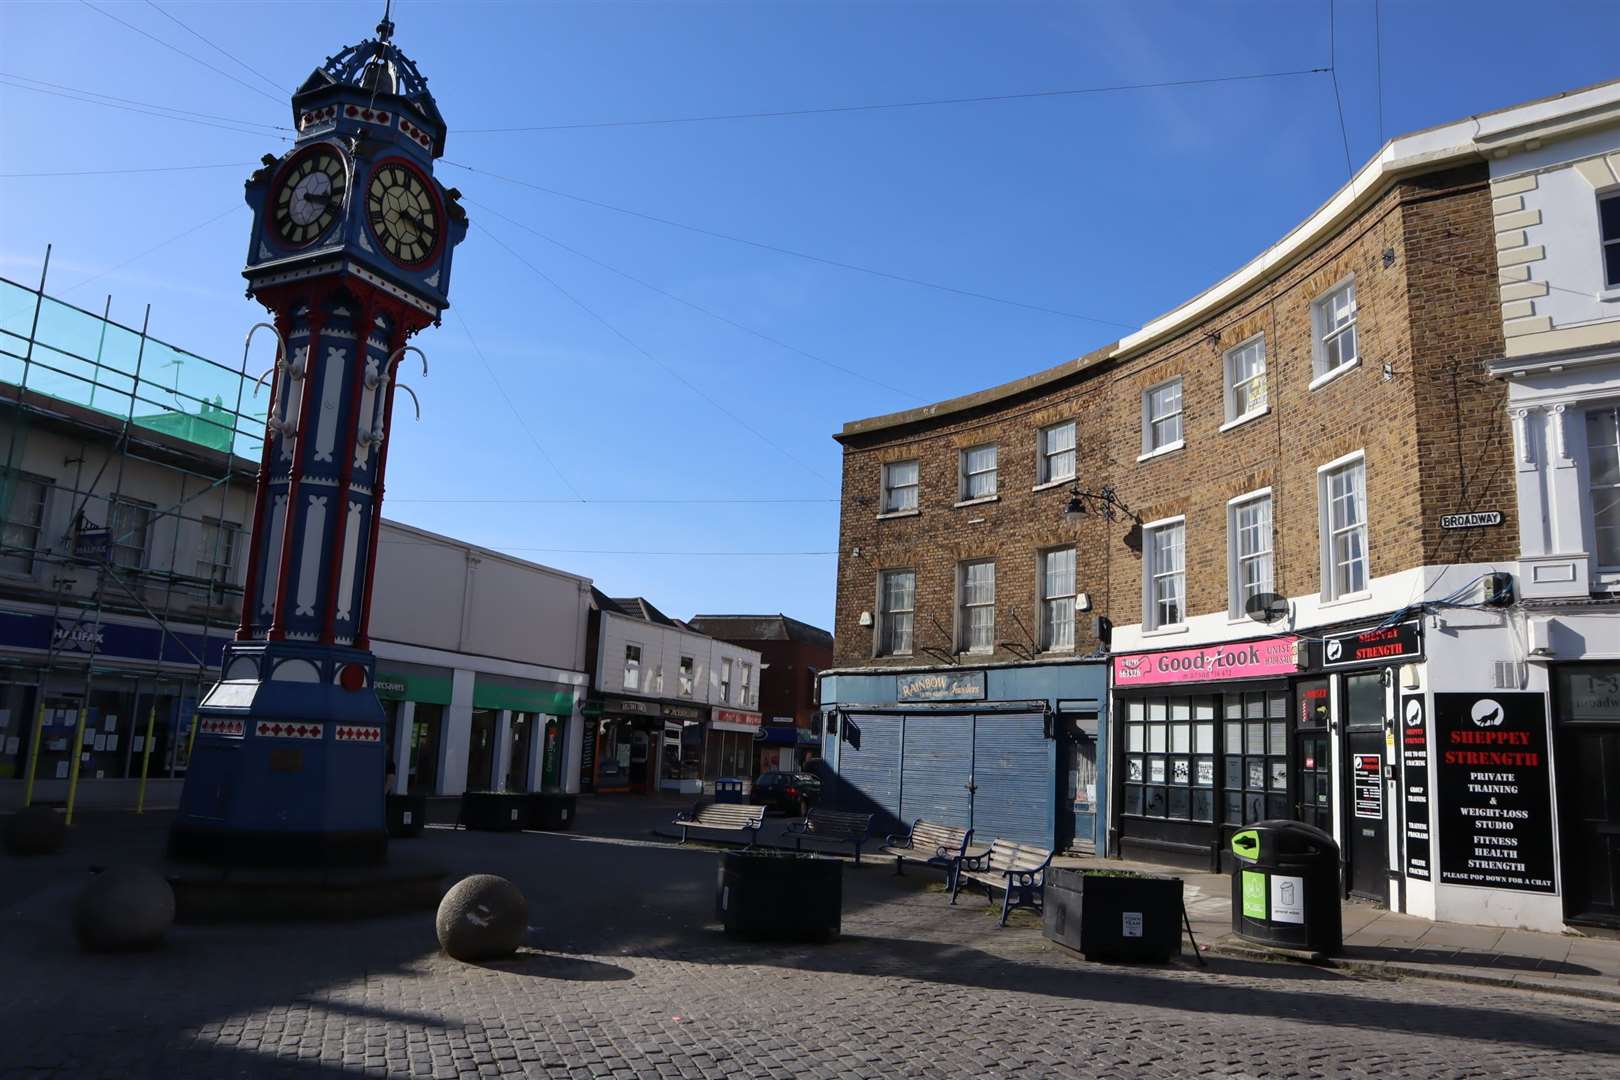 Sheerness was a ghost town as a result of the coronavirus scare and lockdown being put in place just five days earlier